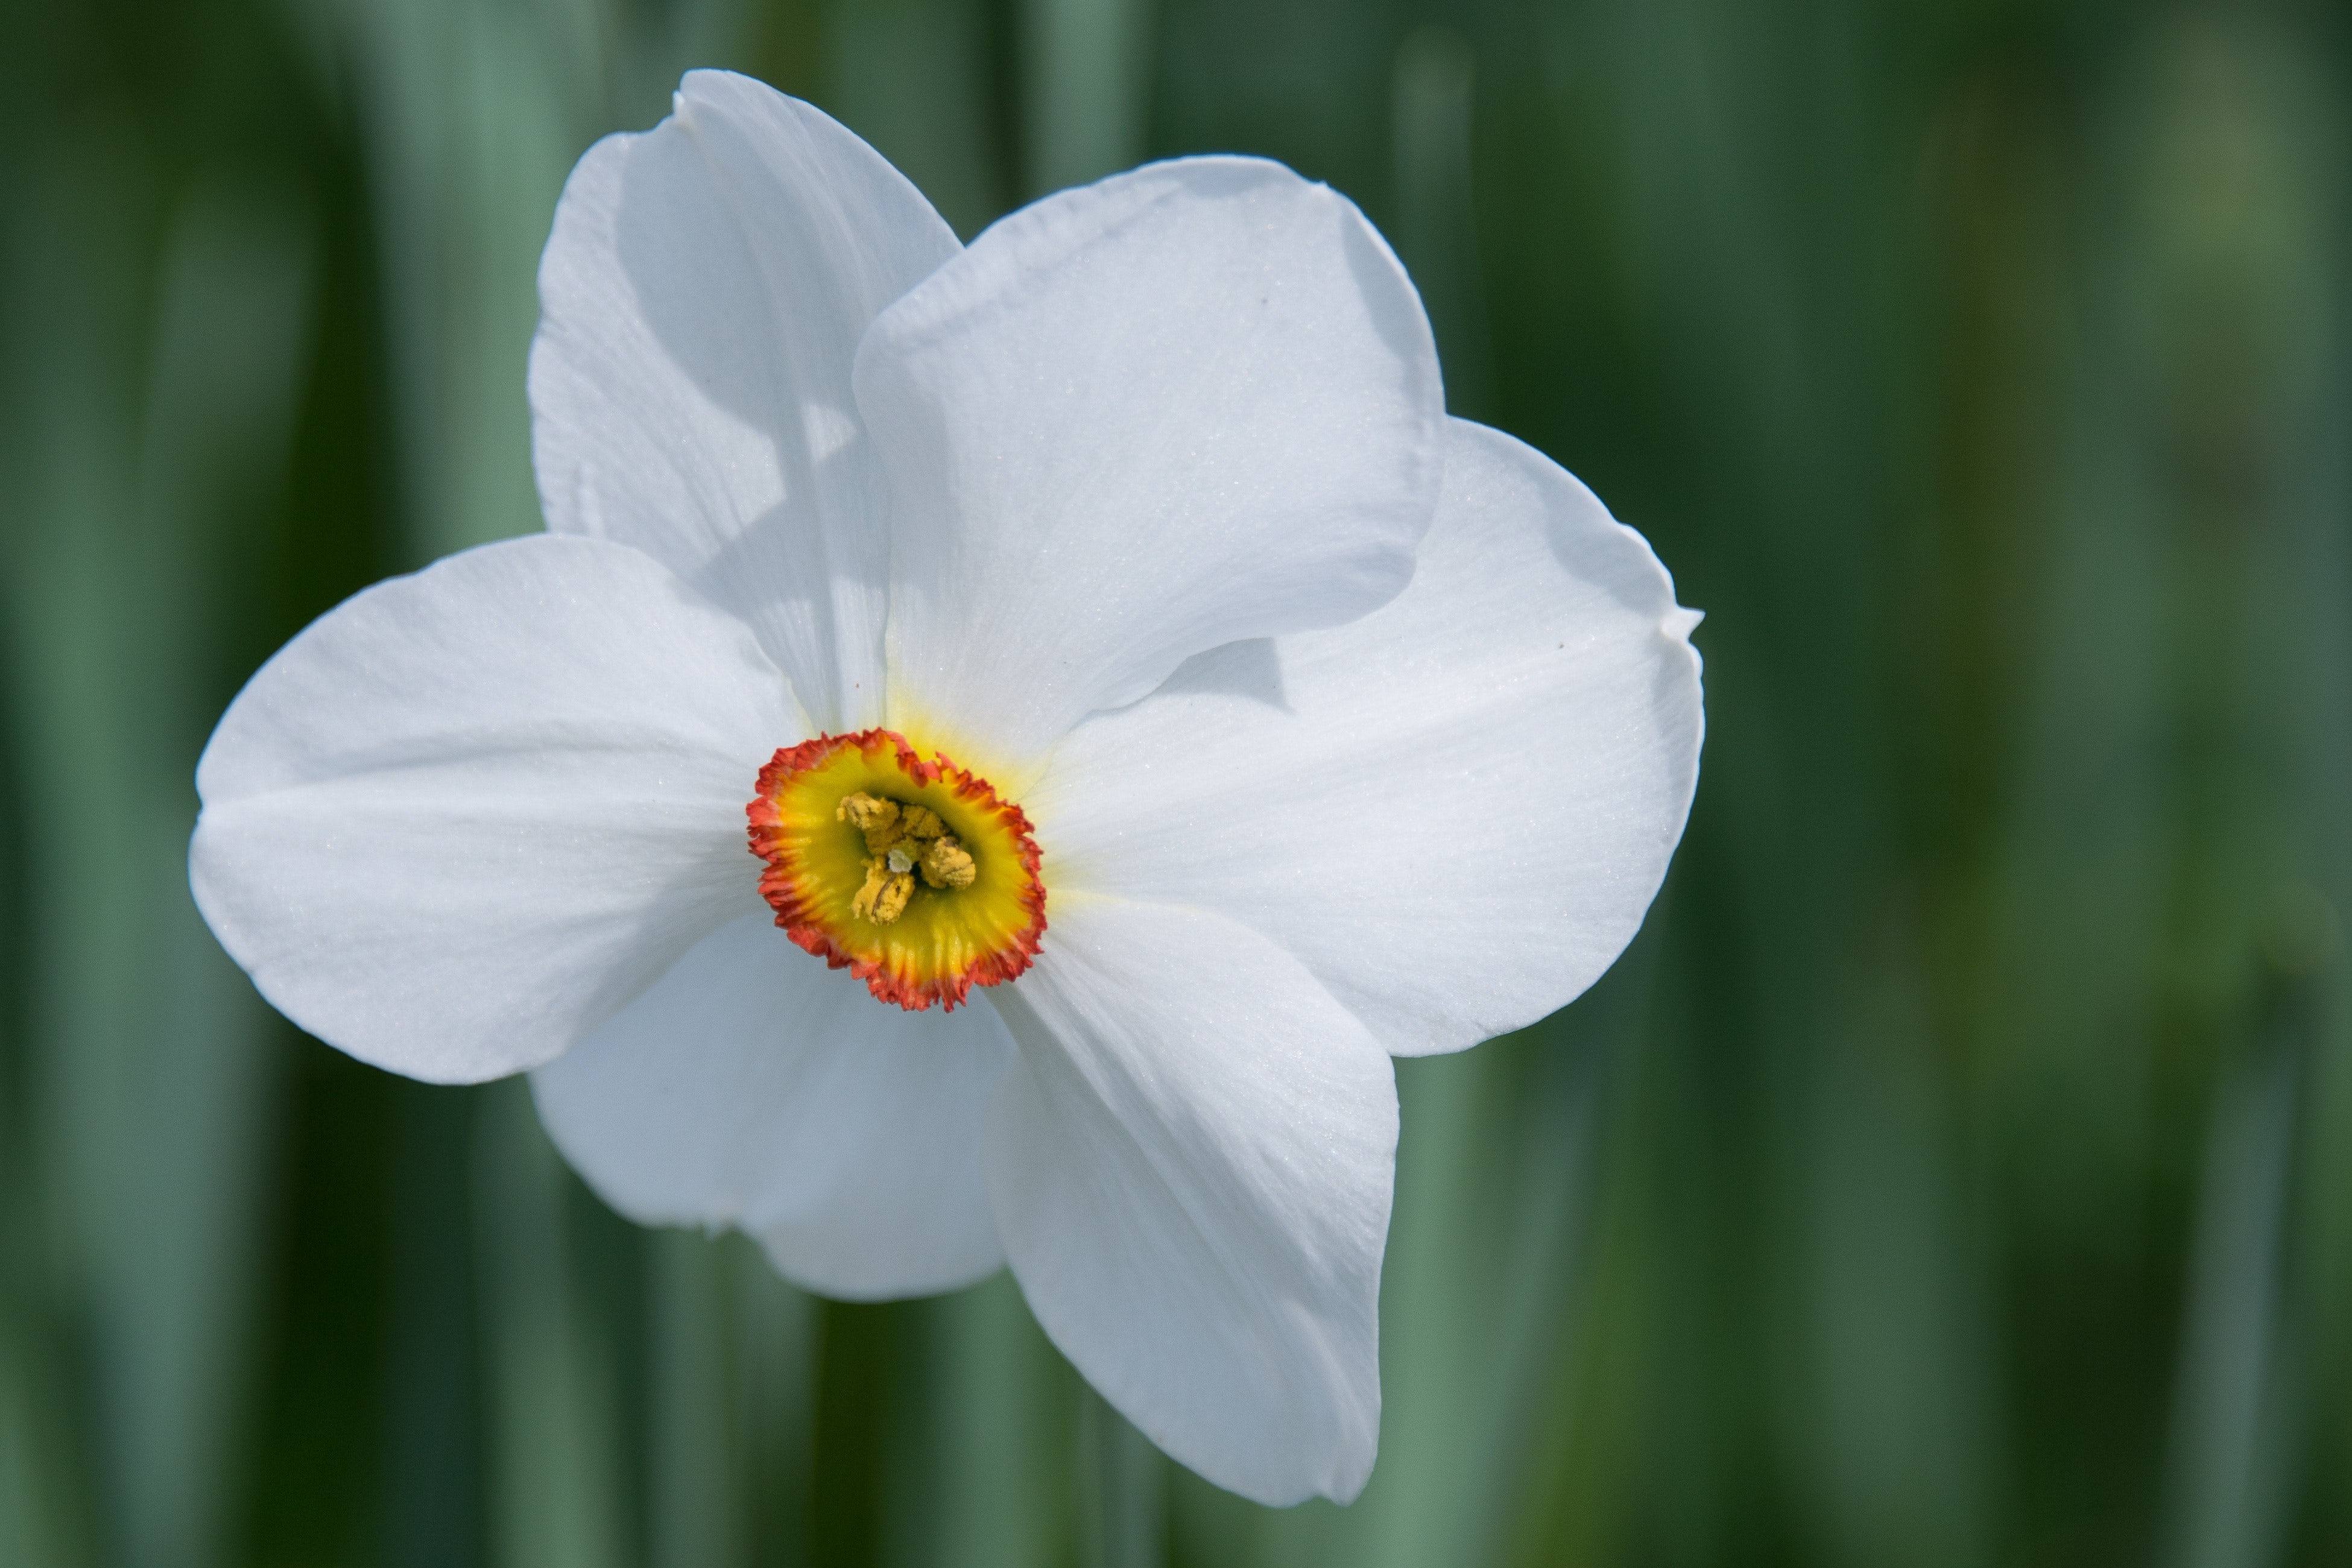 White 6 Petaled Flower, Bloom, Blossom, Close-up, Daffodil, HQ Photo